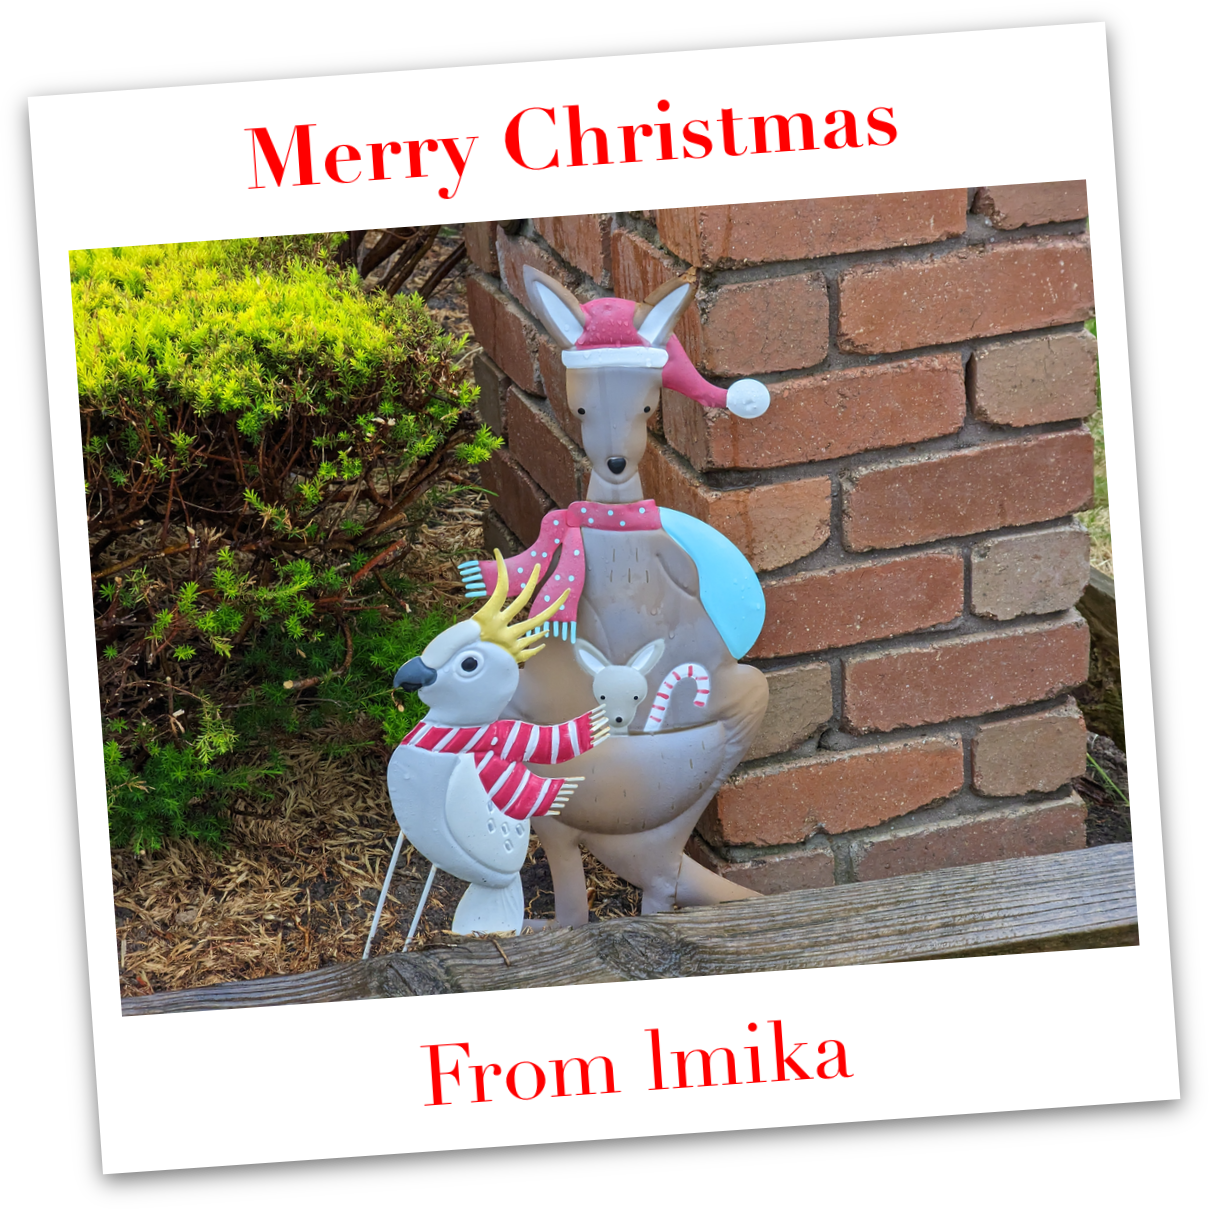 A postcard with a photo with a kangaroo in a Christmas suit with a Joey with a candy cane, and a cockatoo with a scarf, with the message 'Merry Christmas' above the photograph and 'From lmika' below it